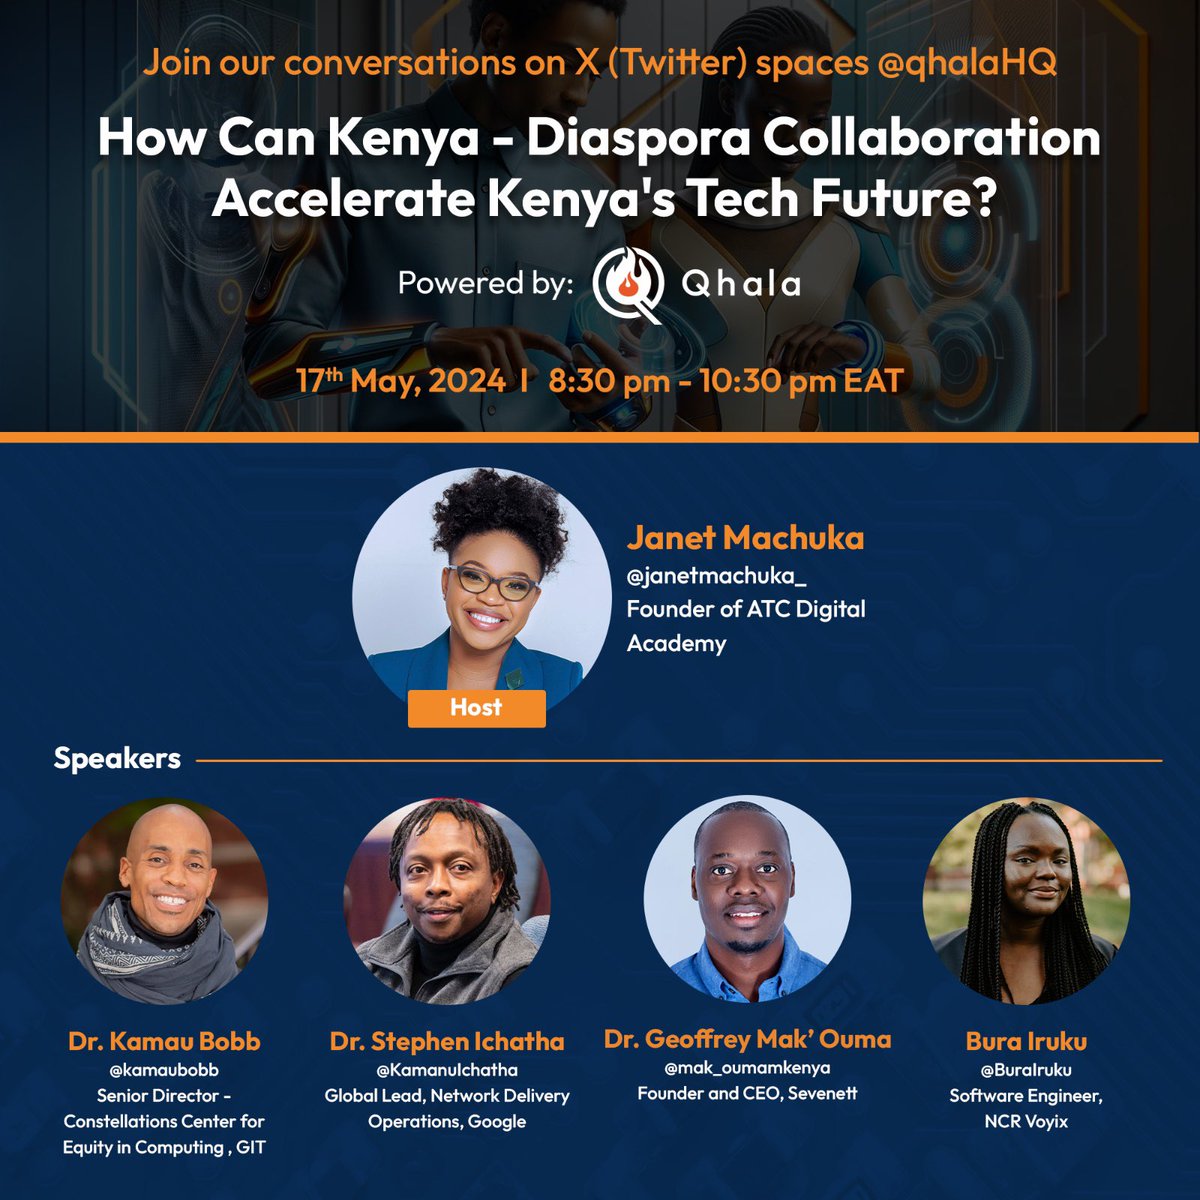 It would be amazing to see you join us in this conversation on ‘How Kenya-Diaspora Collaboration Accelerate Kenya’s Tech Future’ in collaboration with @qhalaHQ Reminder set: x.com/i/spaces/1yokm…